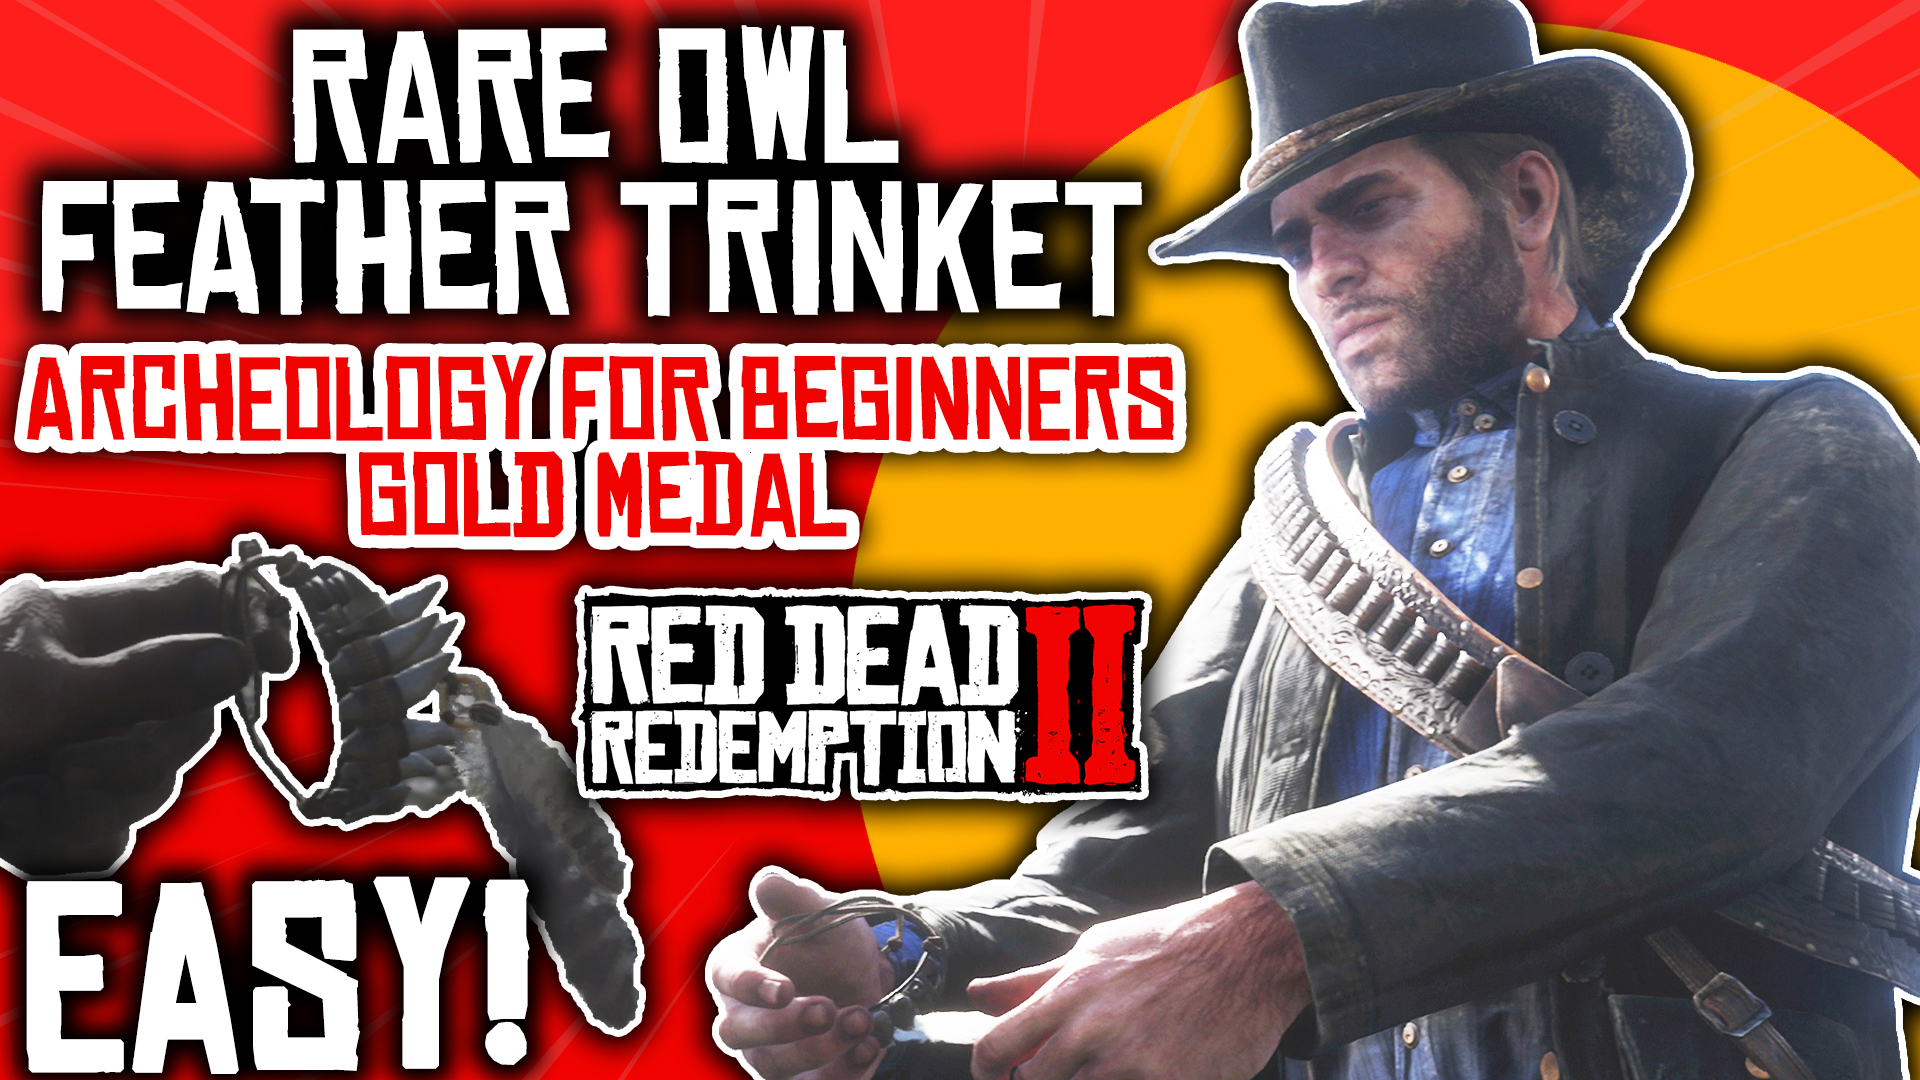 Owl Feather Trinket & Gold Medal | Archeology For Beginners | Red Dead Redemption II